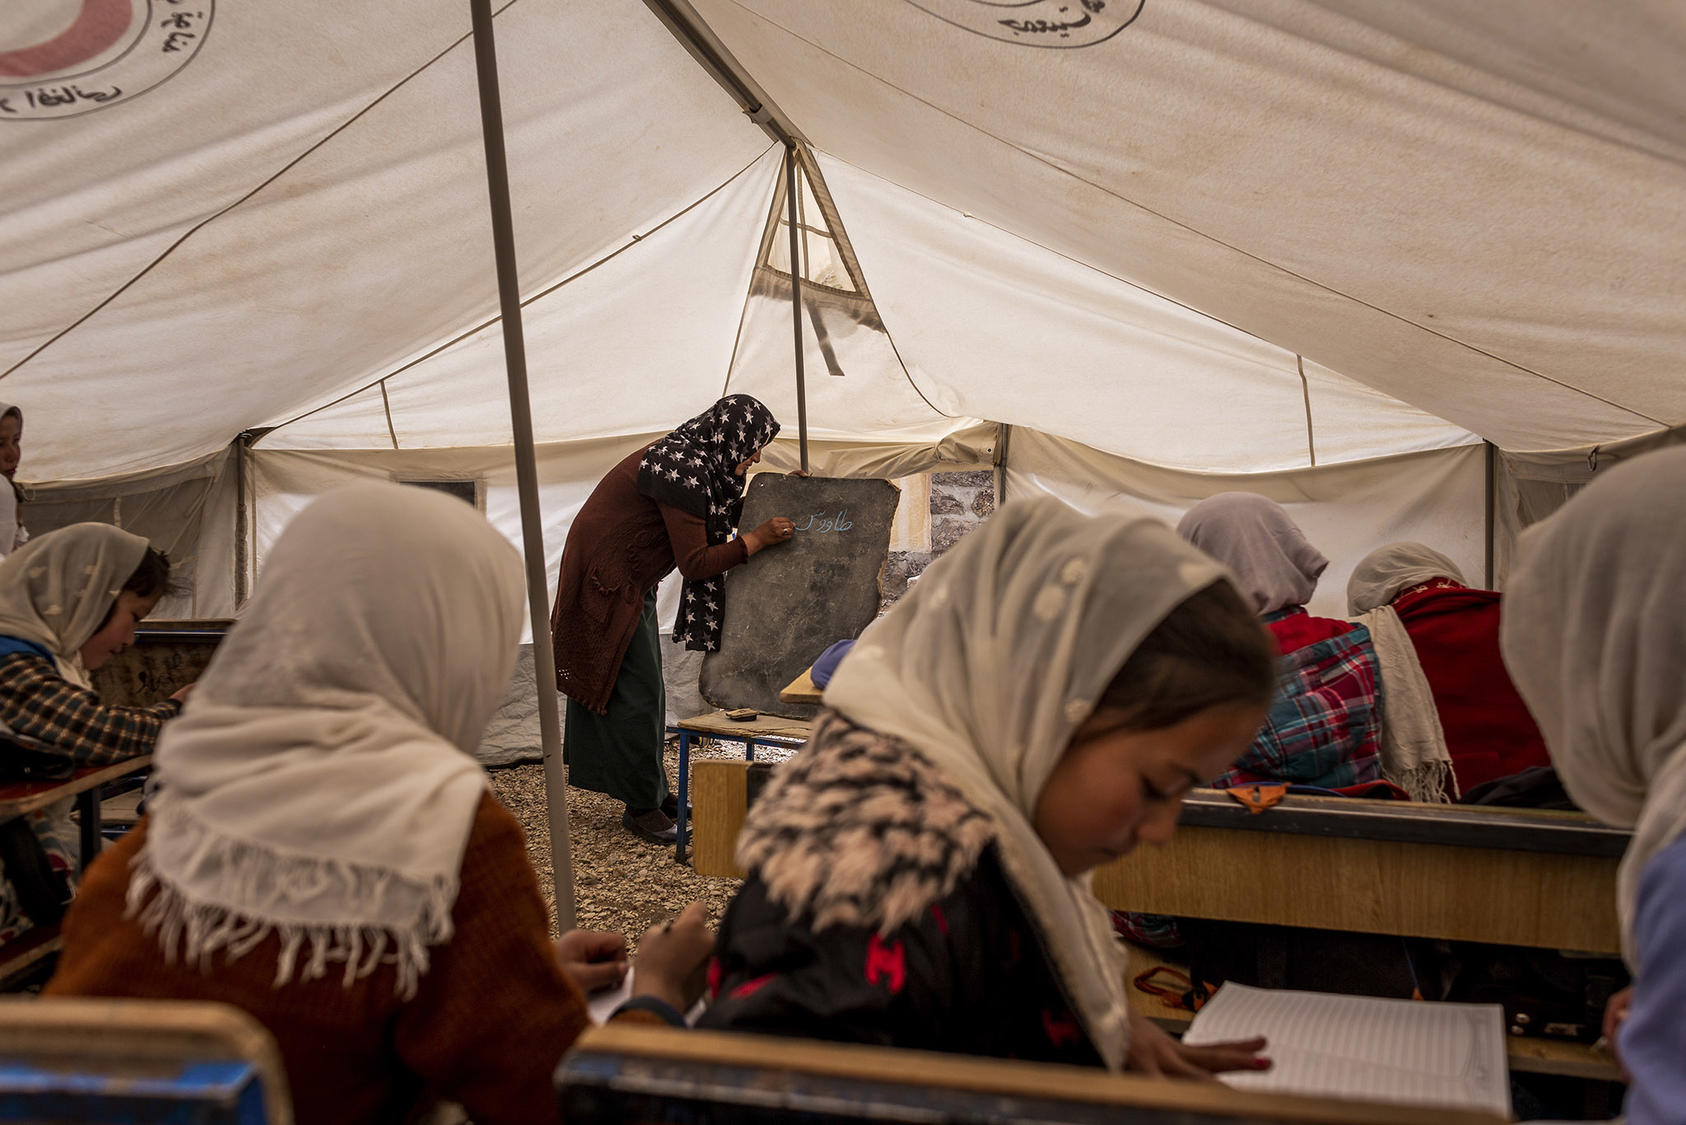 Girls study at a school housed in a tent in central Afghanistan. Afghan women leaders vow to work to preserve education for women and girls in any negotiations with the Taliban over the country’s future. (Jim Huylebroek/The New York Times)